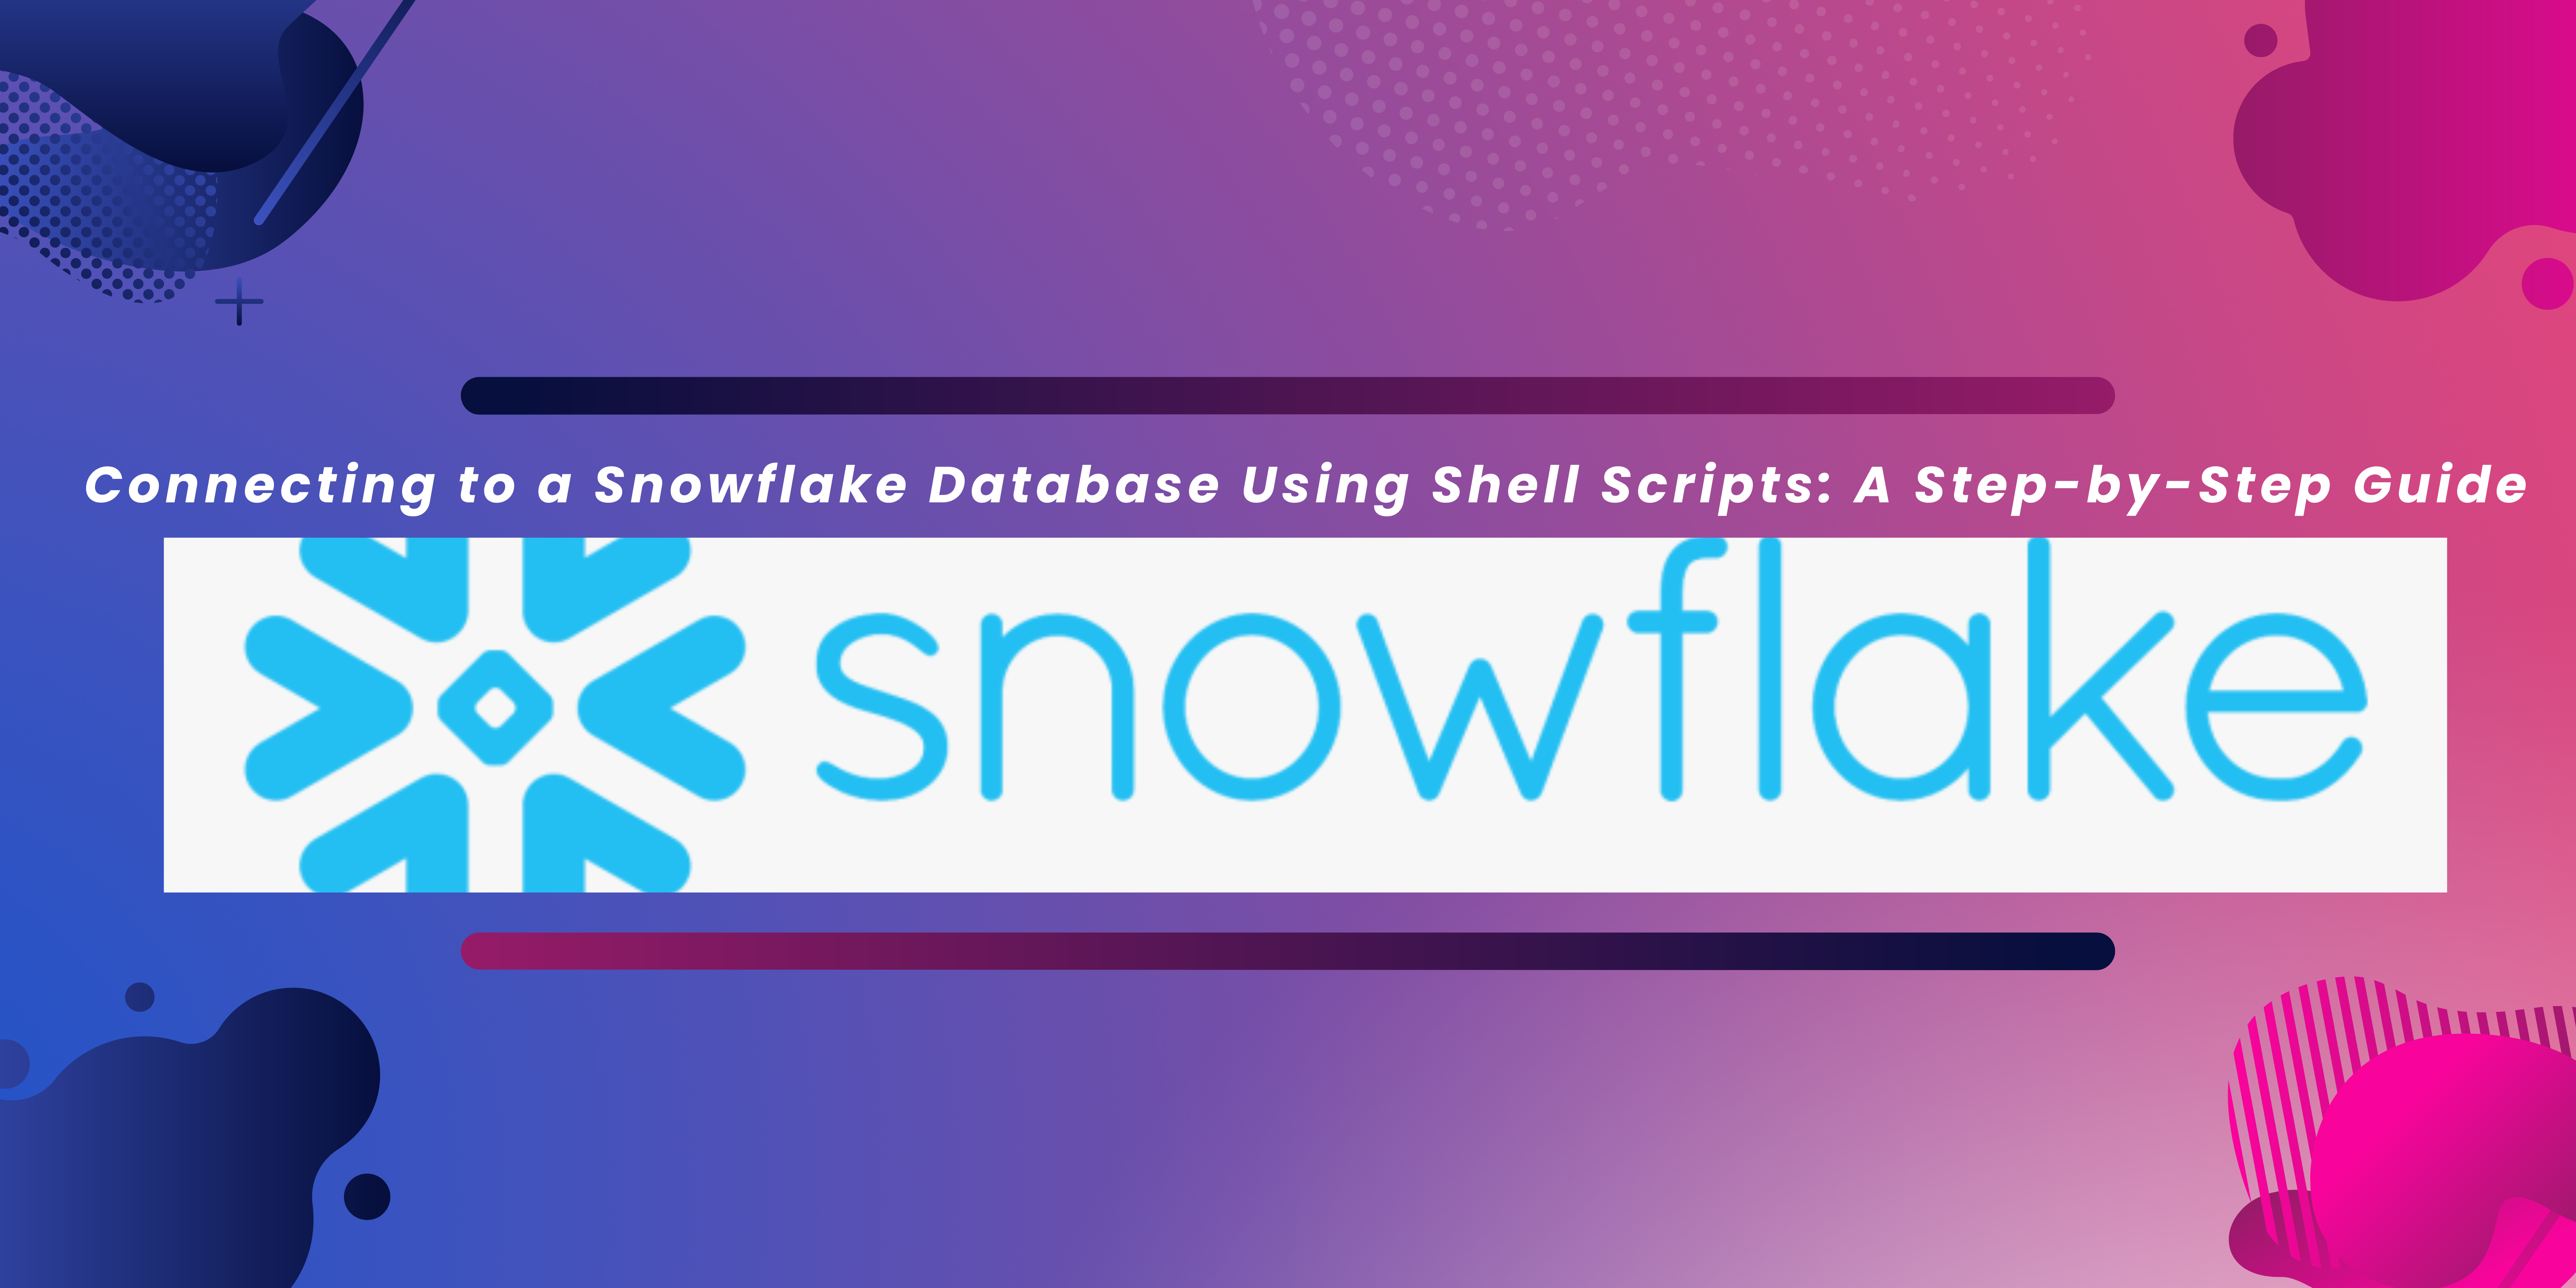 You are currently viewing Connecting to a Snowflake Database Using Shell Scripts: A Step-by-Step Guide